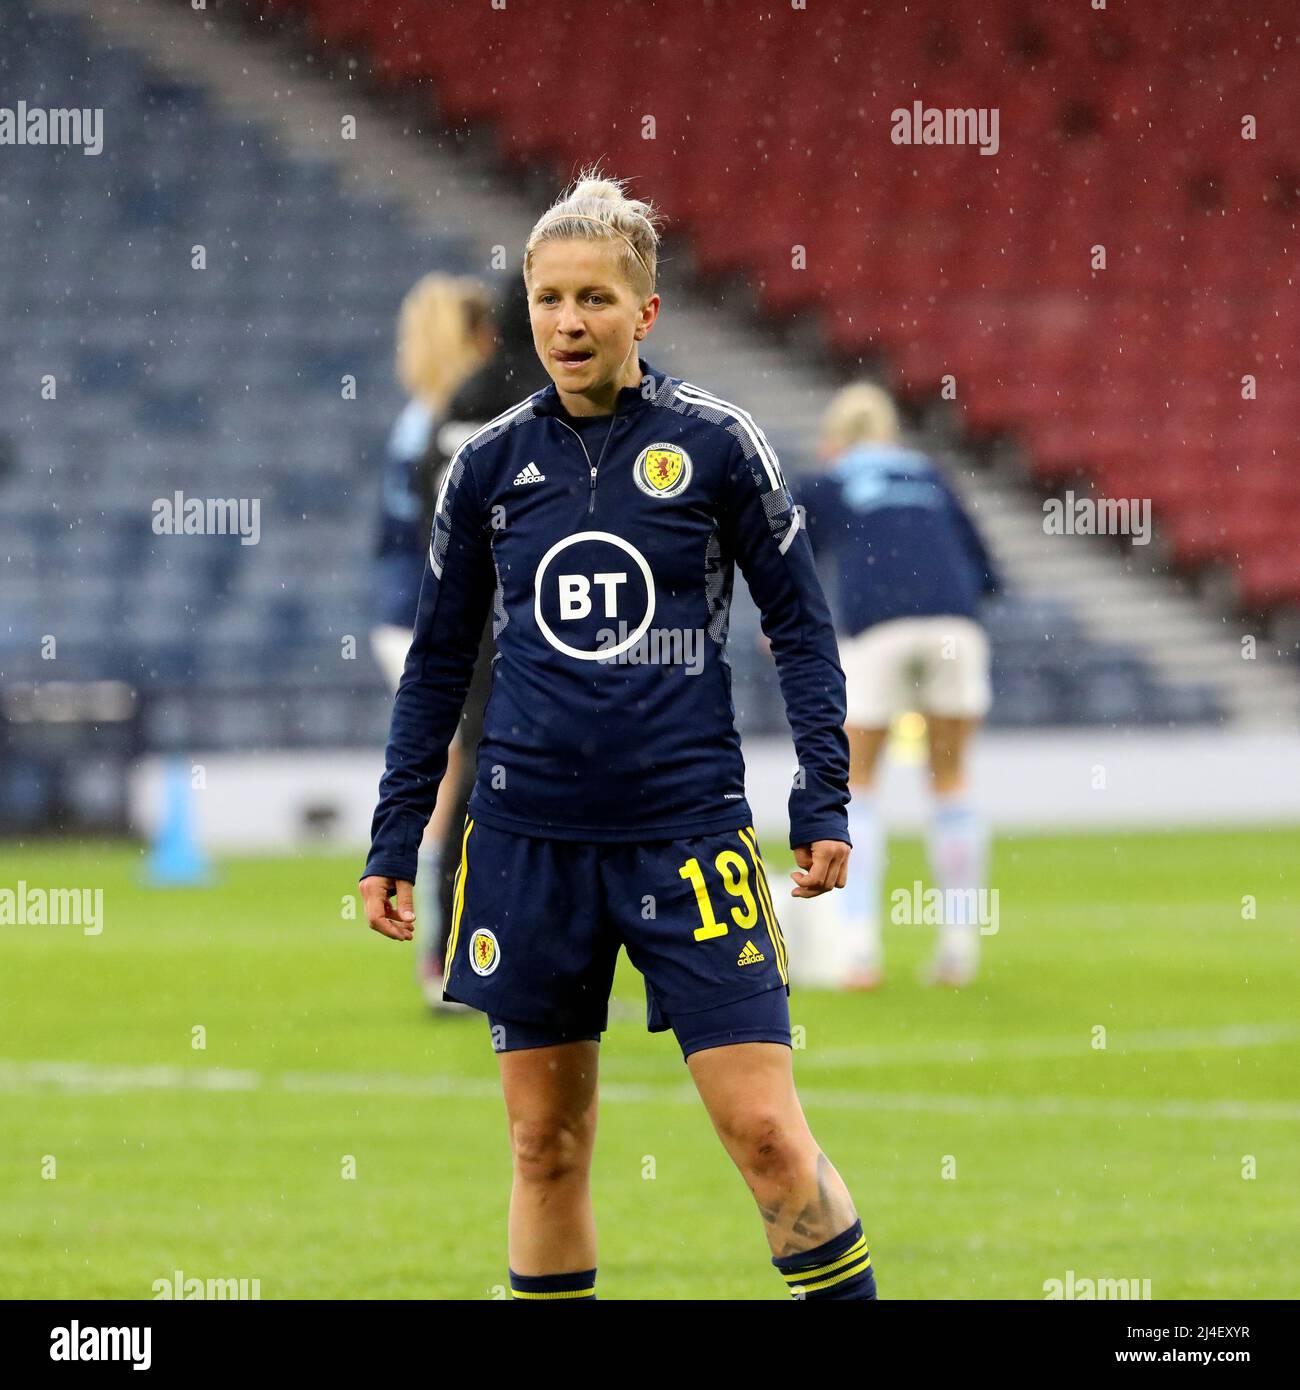 LANA CLELLAND, Scottish professional football player, playing for Scotland  at Hampden Park, Glasgow in the FIFA Women's World Cup qualifying round aga  Stock Photo - Alamy